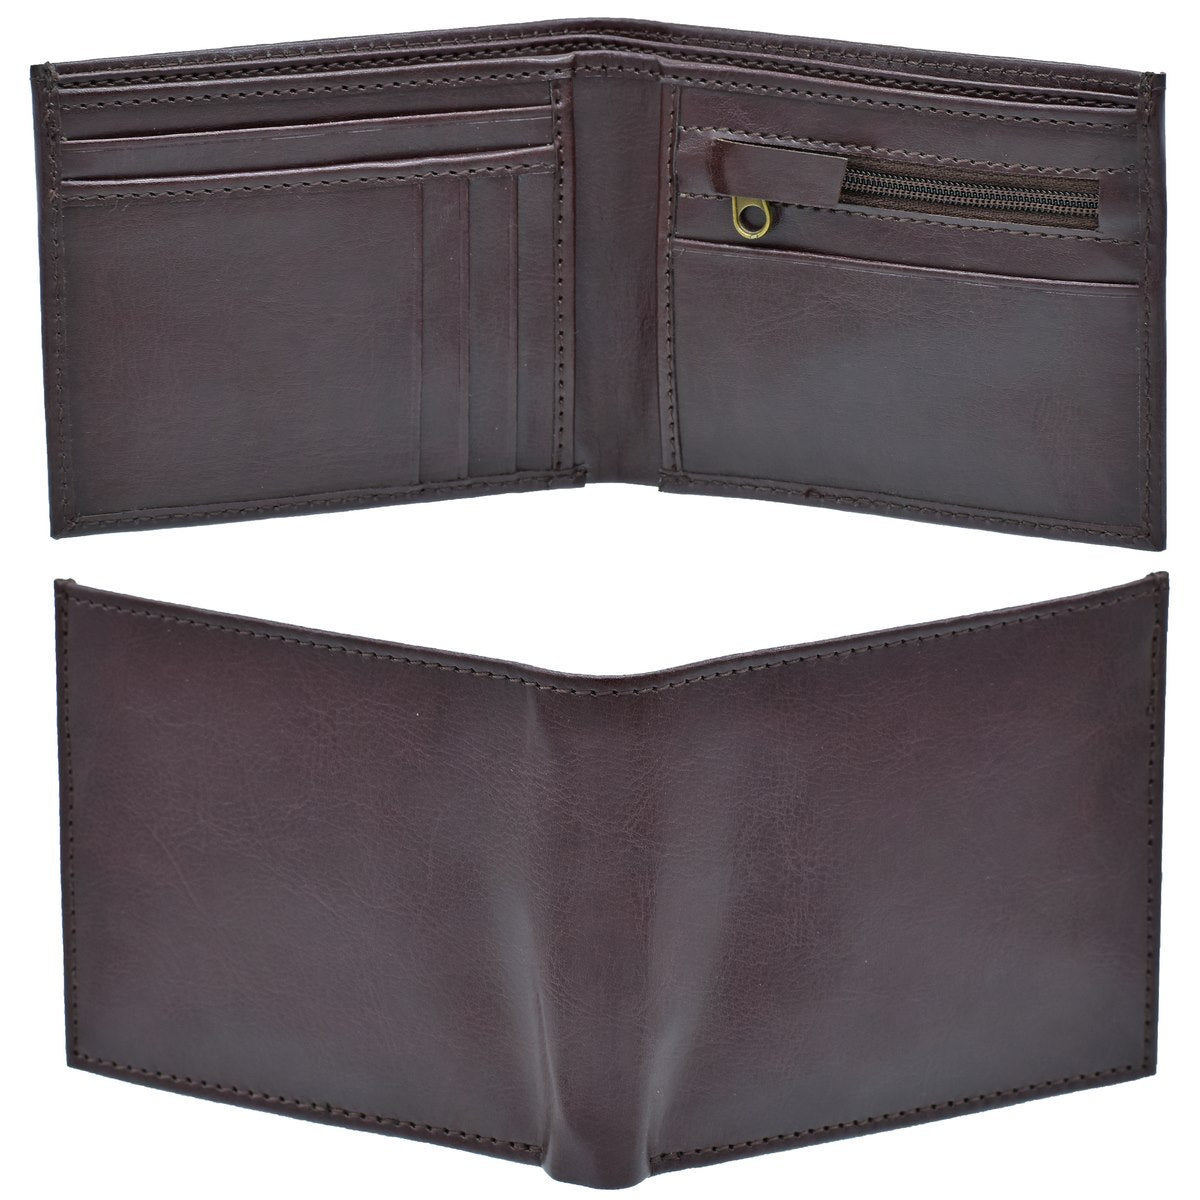 Brown Leather Gents Wallet - For Employee, Corporate, Client or Dealer Gifting, Promotional Freebie, Return Gift JA1